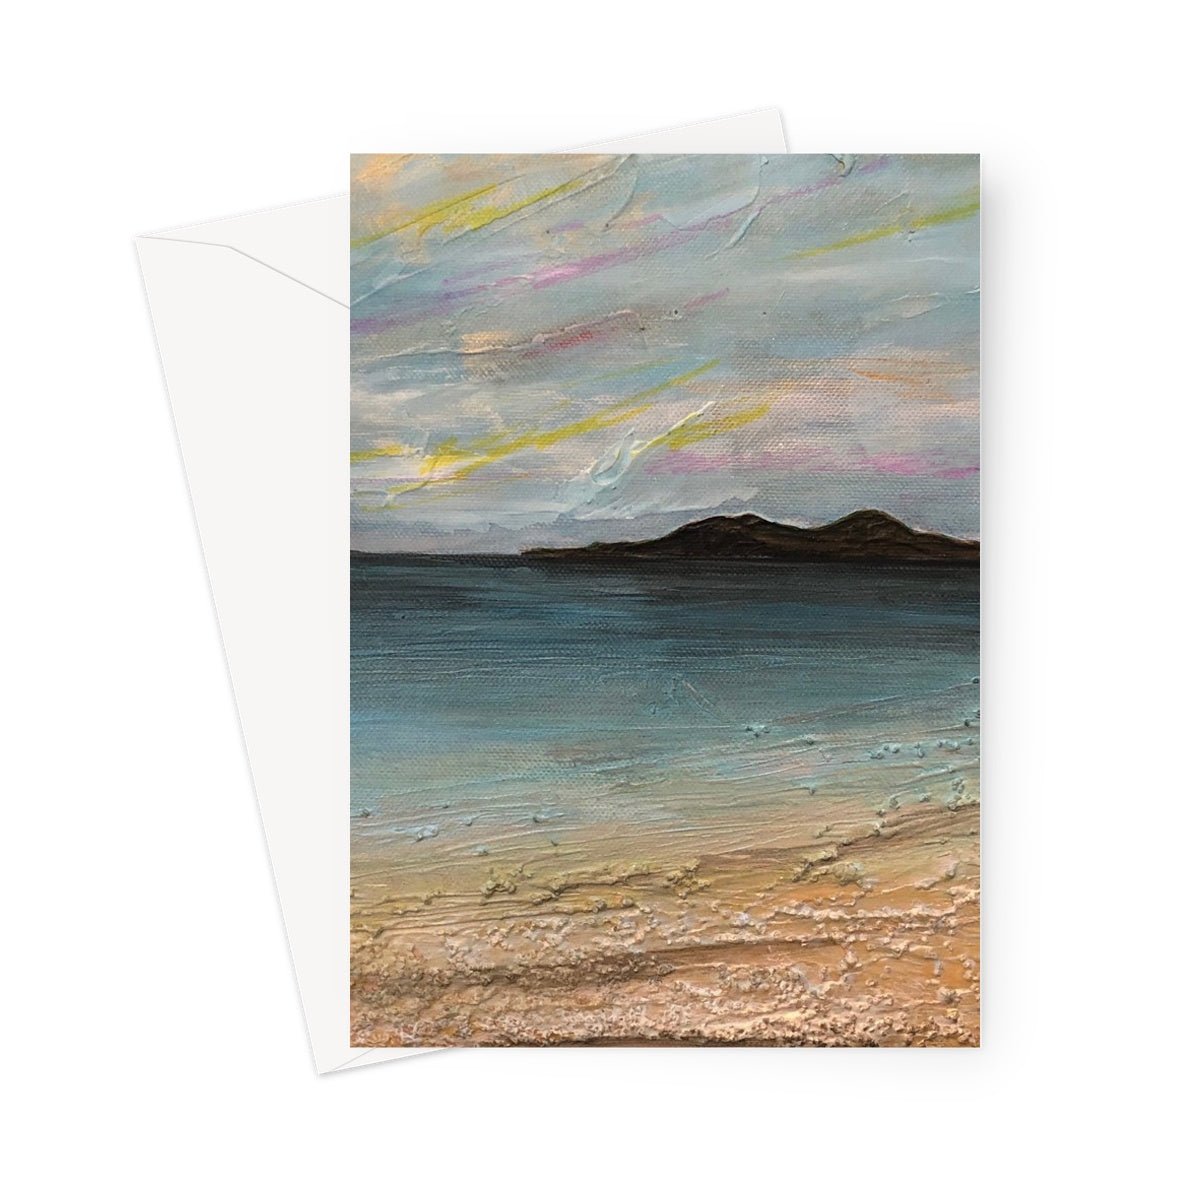 Garrynamonie Beach South Uist Art Gifts Greeting Card-Greetings Cards-Hebridean Islands Art Gallery-5"x7"-10 Cards-Paintings, Prints, Homeware, Art Gifts From Scotland By Scottish Artist Kevin Hunter